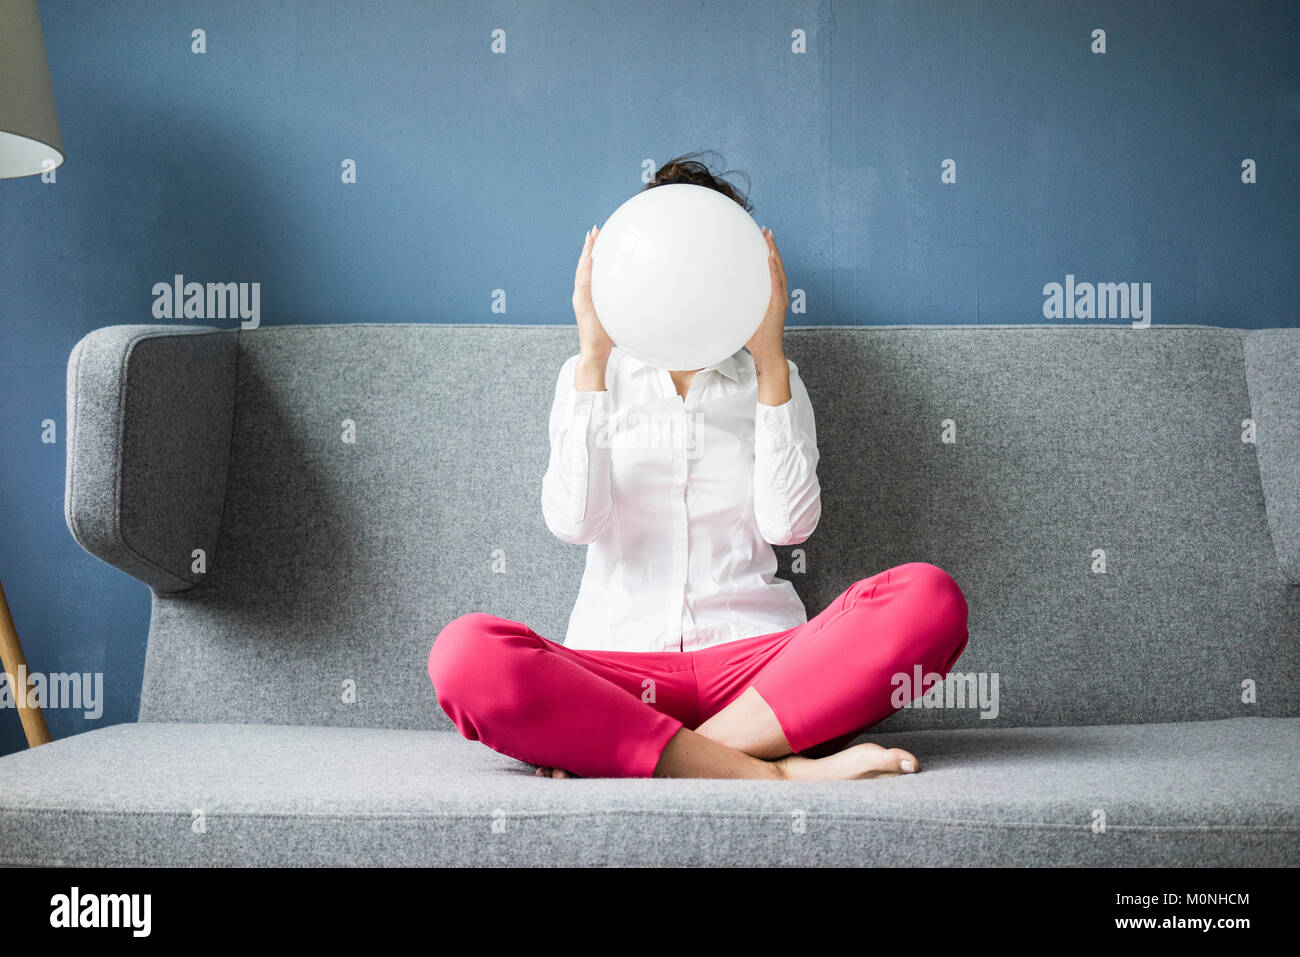 Woman sitting on couch hiding her face behind a white sphere Stock Photo